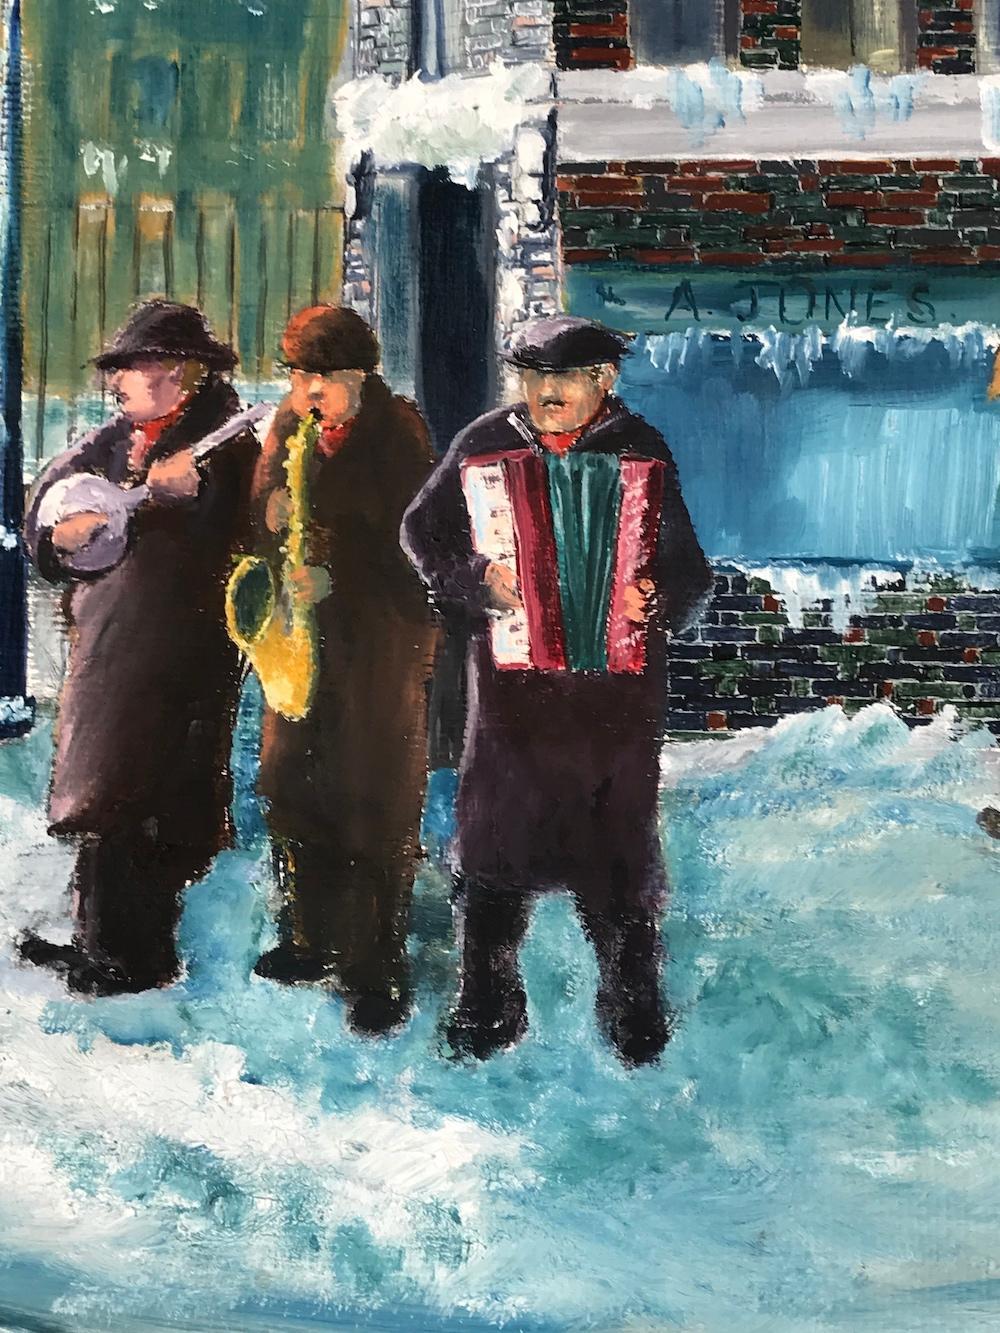 Ron Barnes „The Buskers“, New York, Acryl im Angebot 2